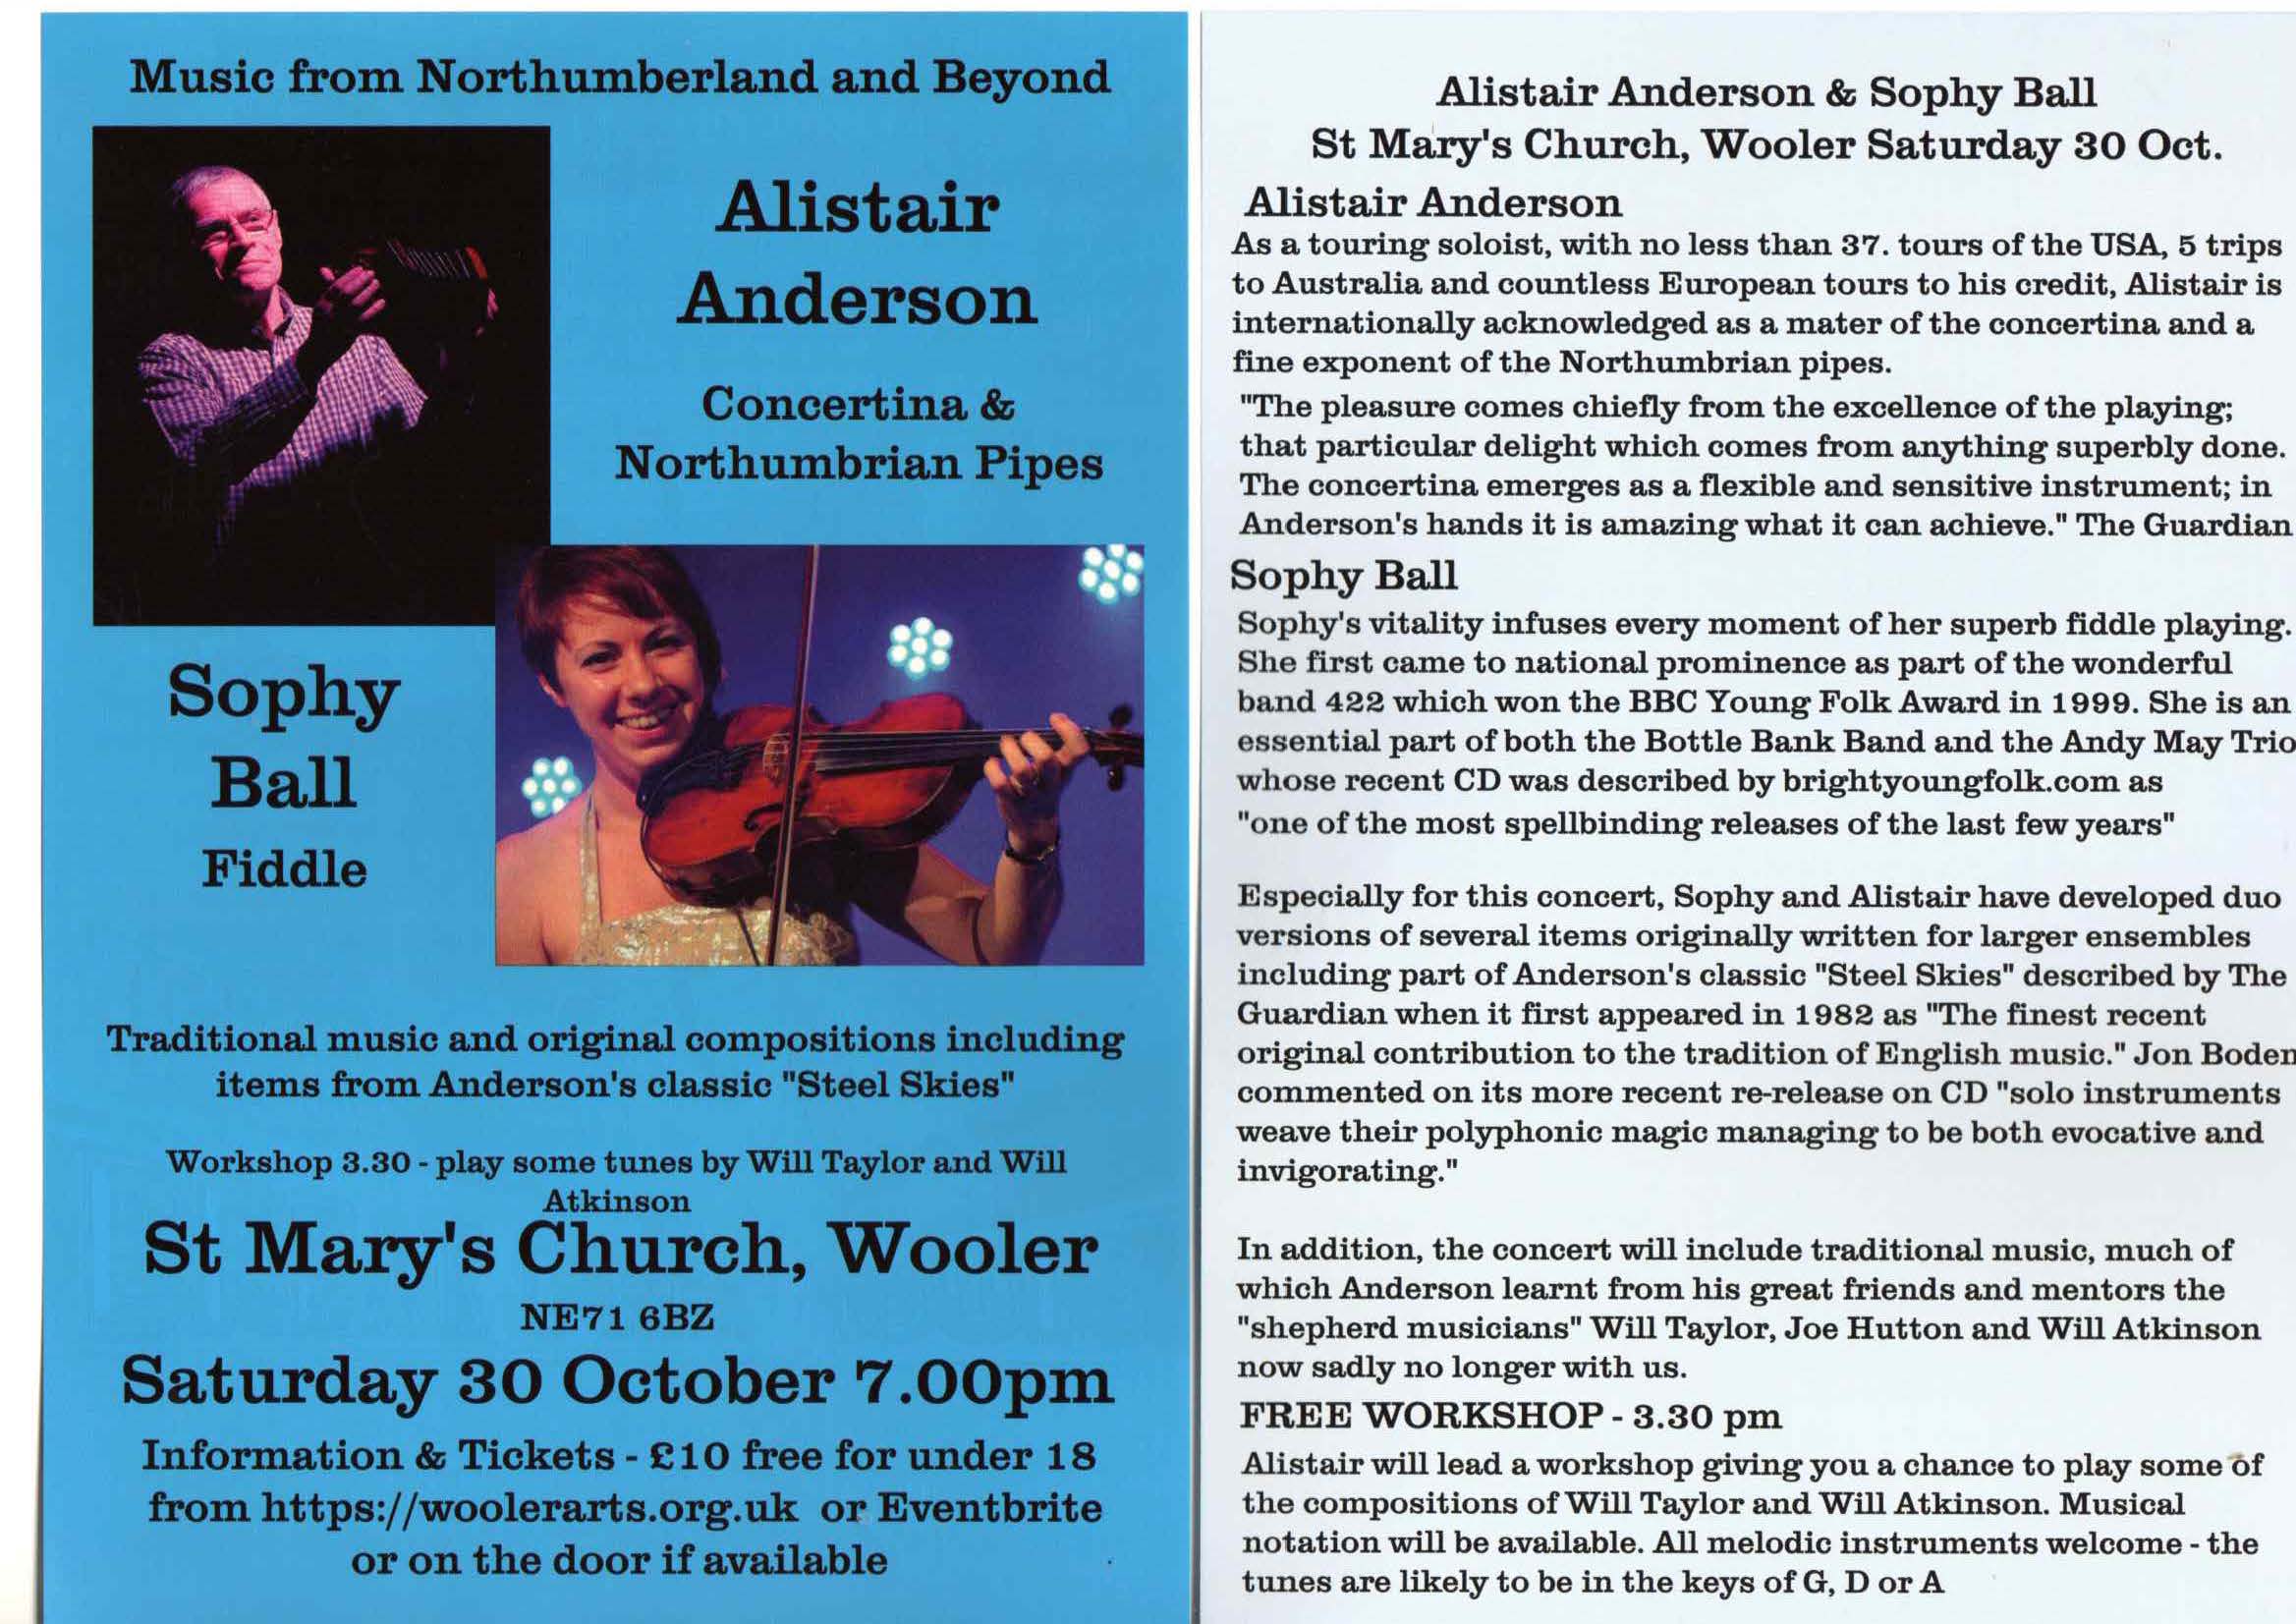 Alistair Anderson Sophy Ball Concert and Workshop